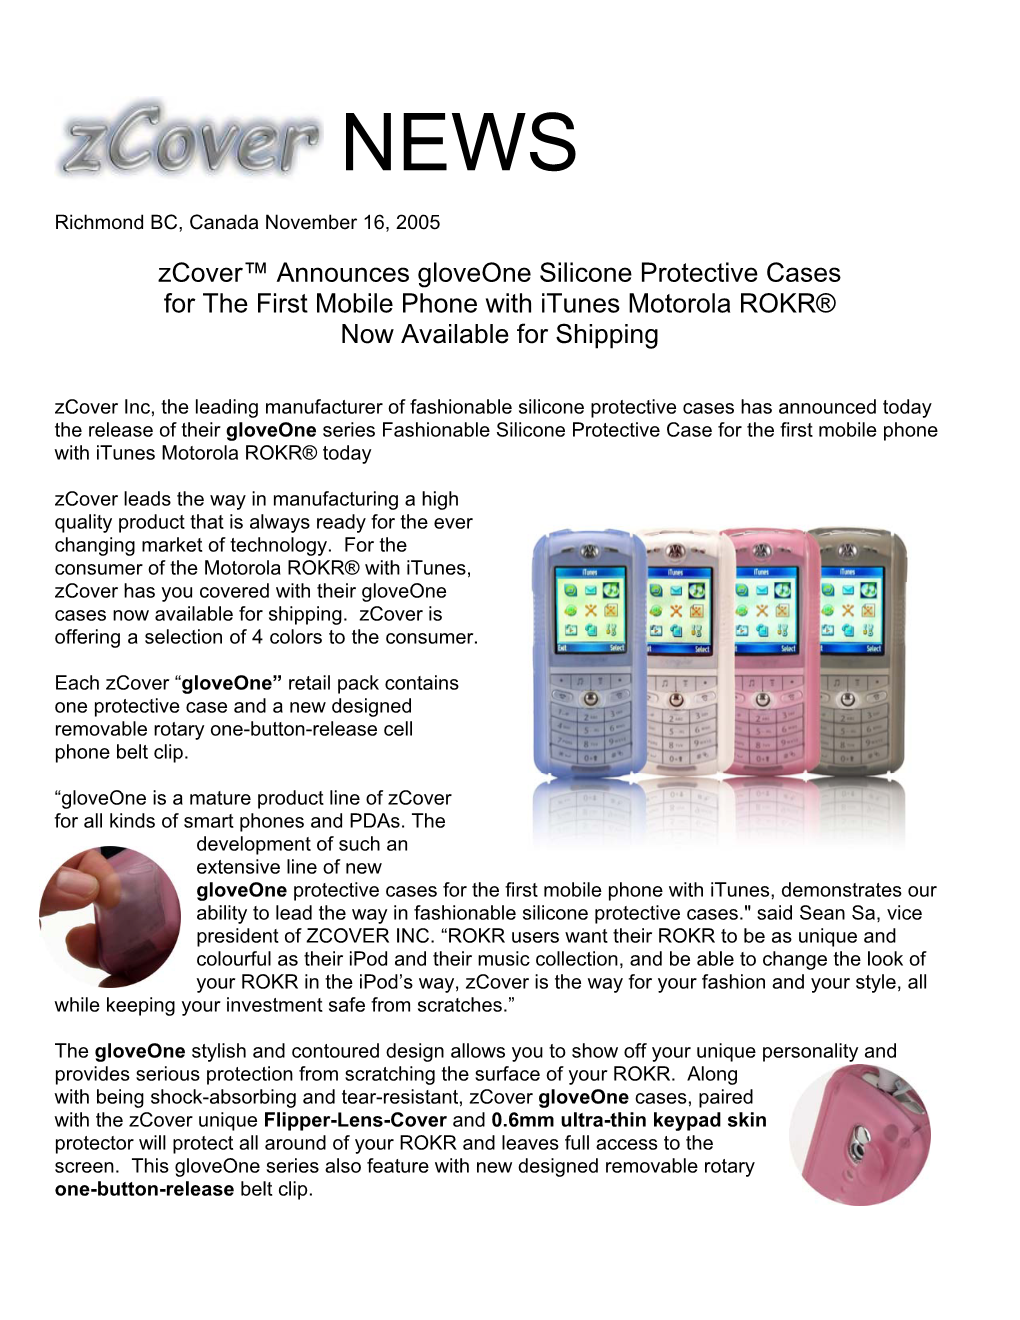 Zcover™ Announces Gloveone Silicone Protective Cases for the First Mobile Phone with Itunes Motorola ROKR® Now Available for Shipping